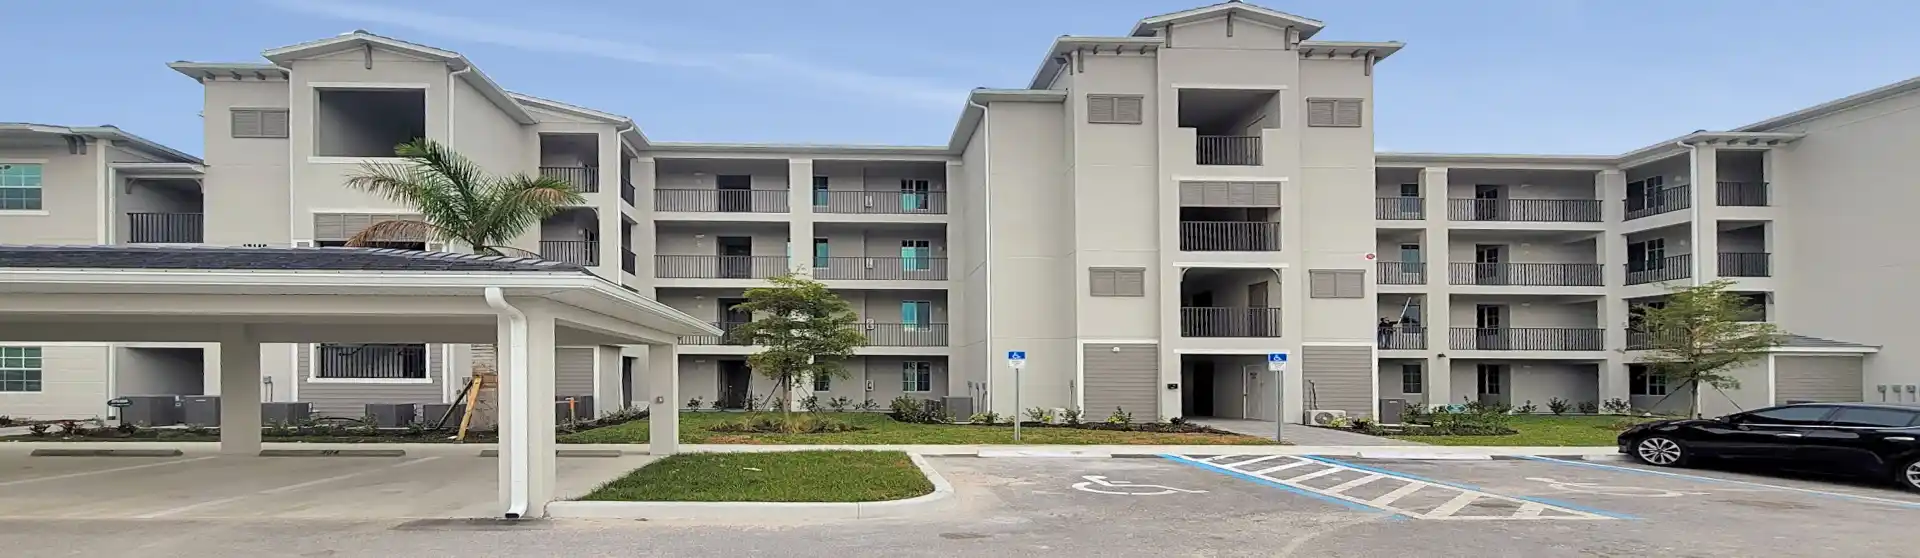 Wellen Park Golf and Country Club Annual Condo for Rent